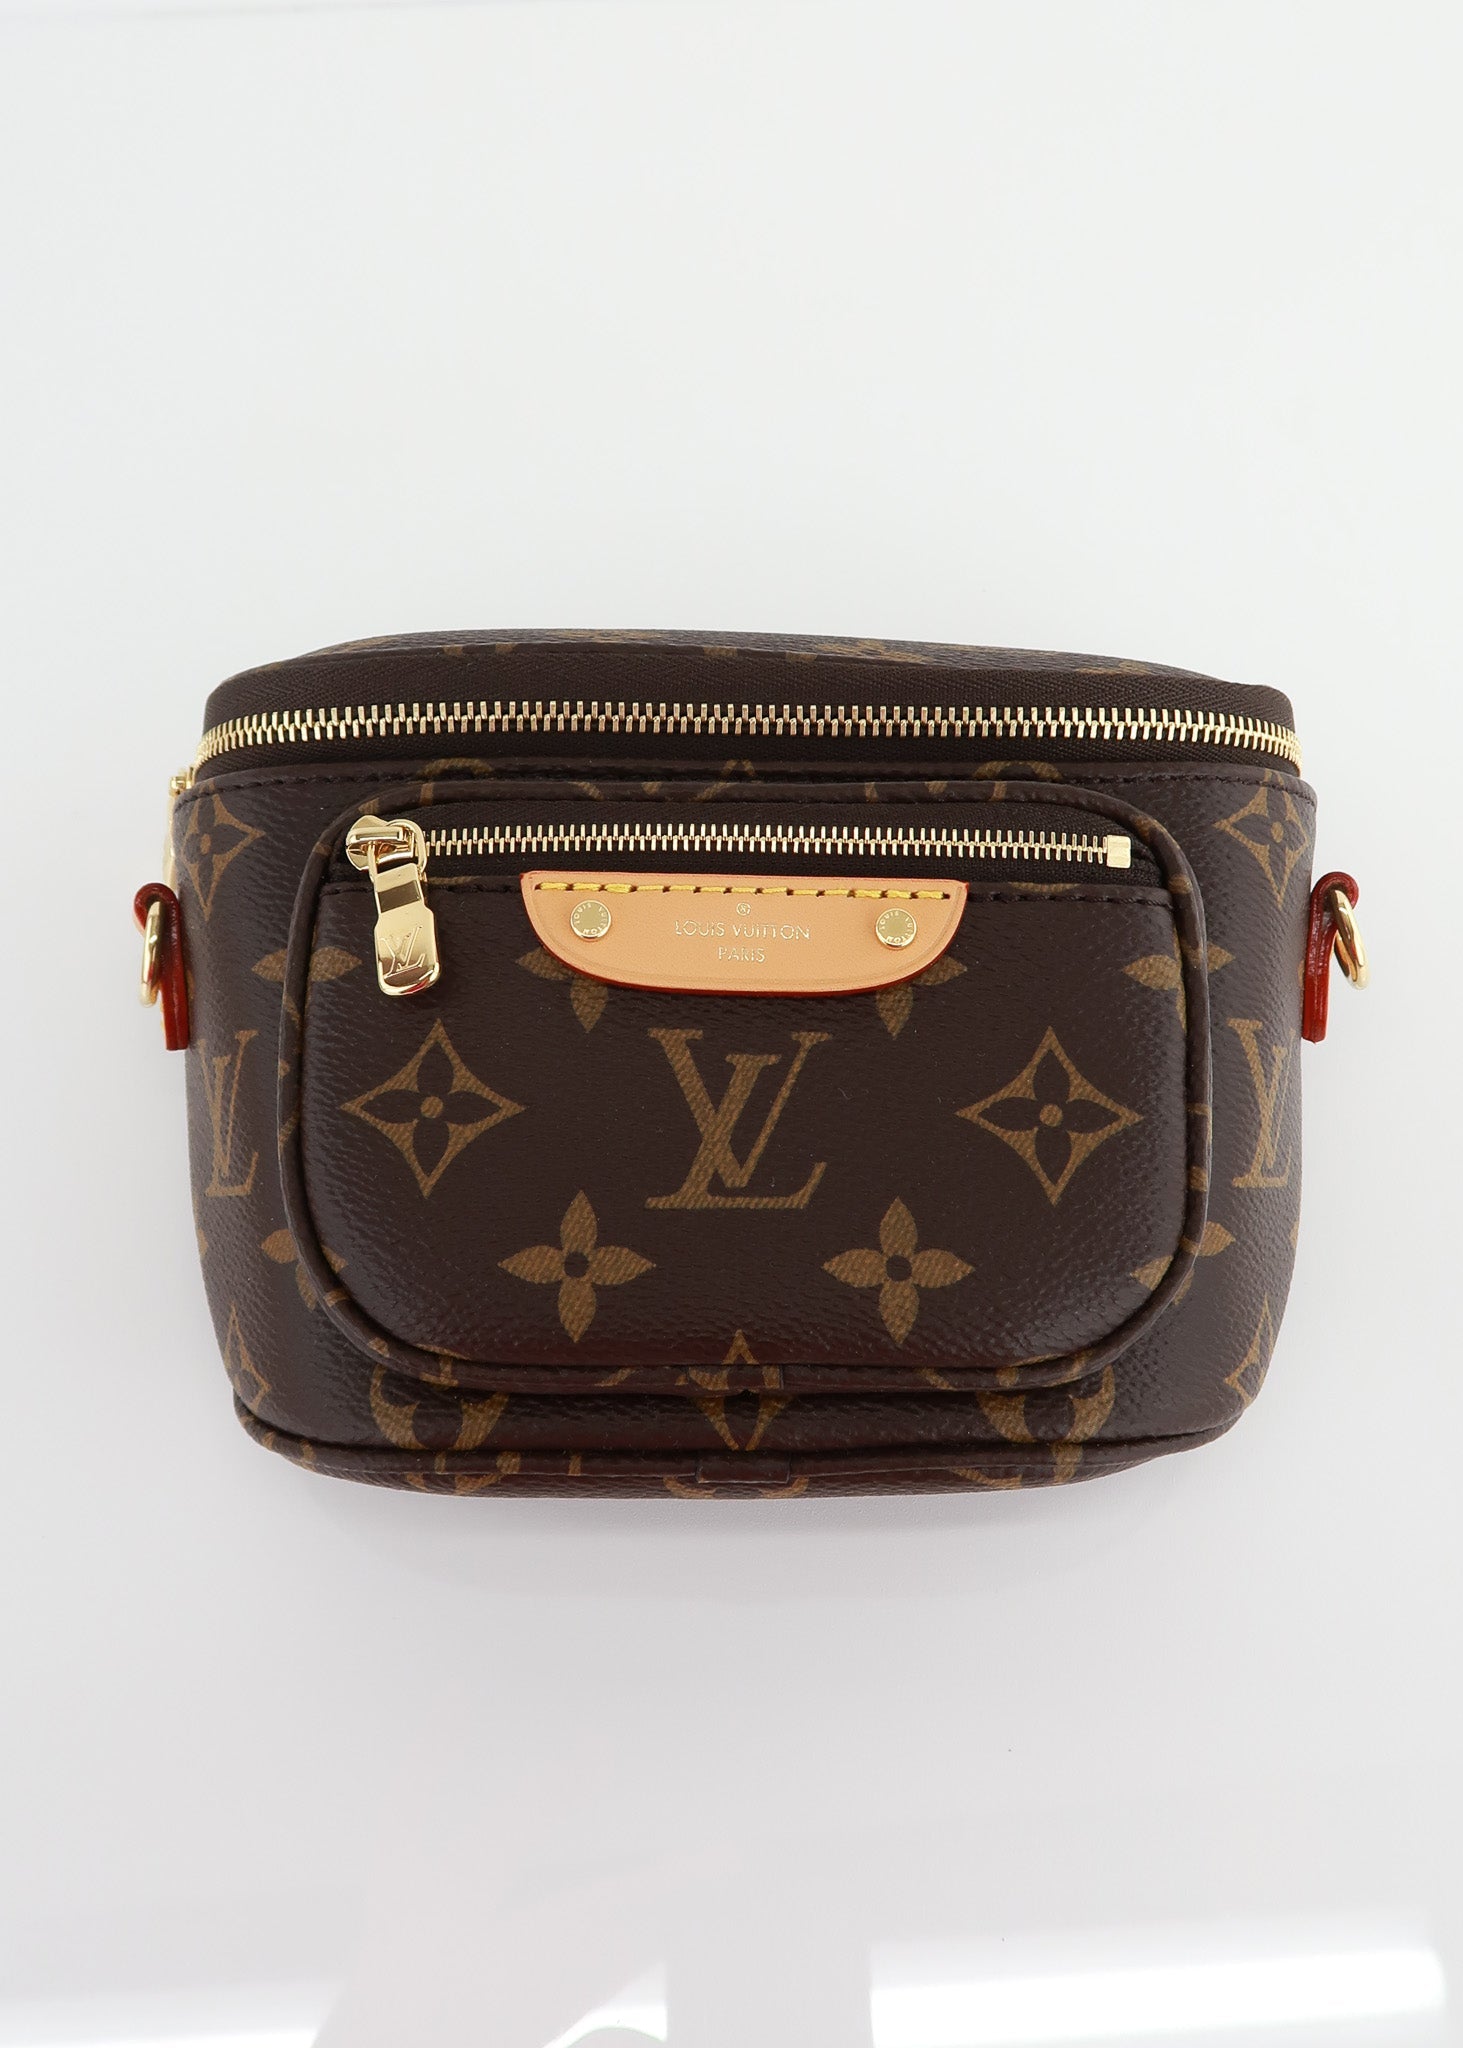 WHAT CAN FIT INSIDE OF MY Louis Vuitton BUM BAG 